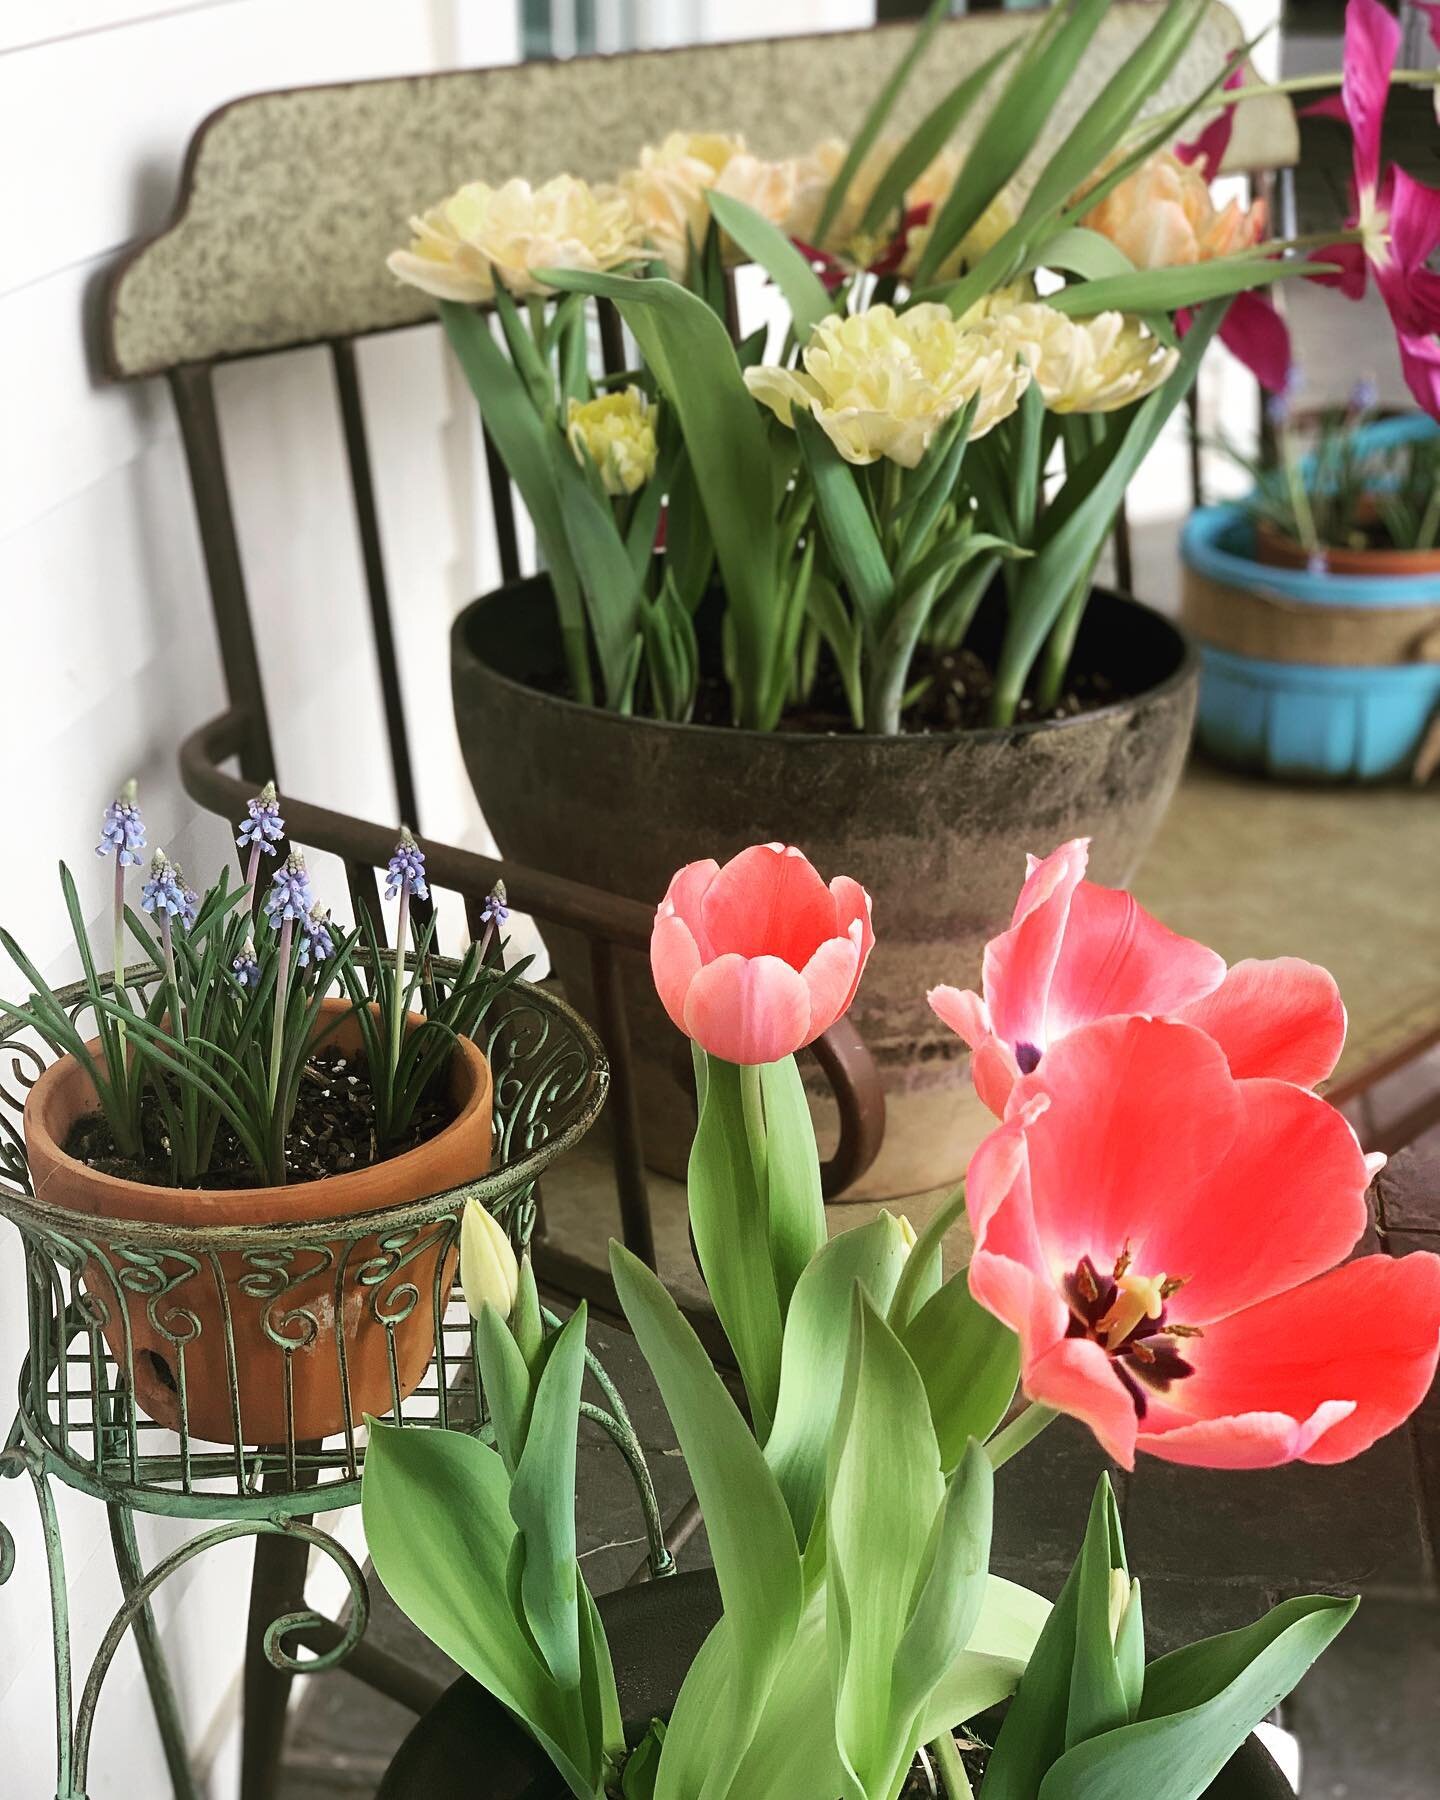 🤍🖤 The days are getting longer and the flowers are getting taller. The best part of spring is playing in the dirt! 

Welcome to the #HomesWithPurpose tour! 

Come join us to meet new friends &amp; discover beautiful homes, floor plans and decor. I 